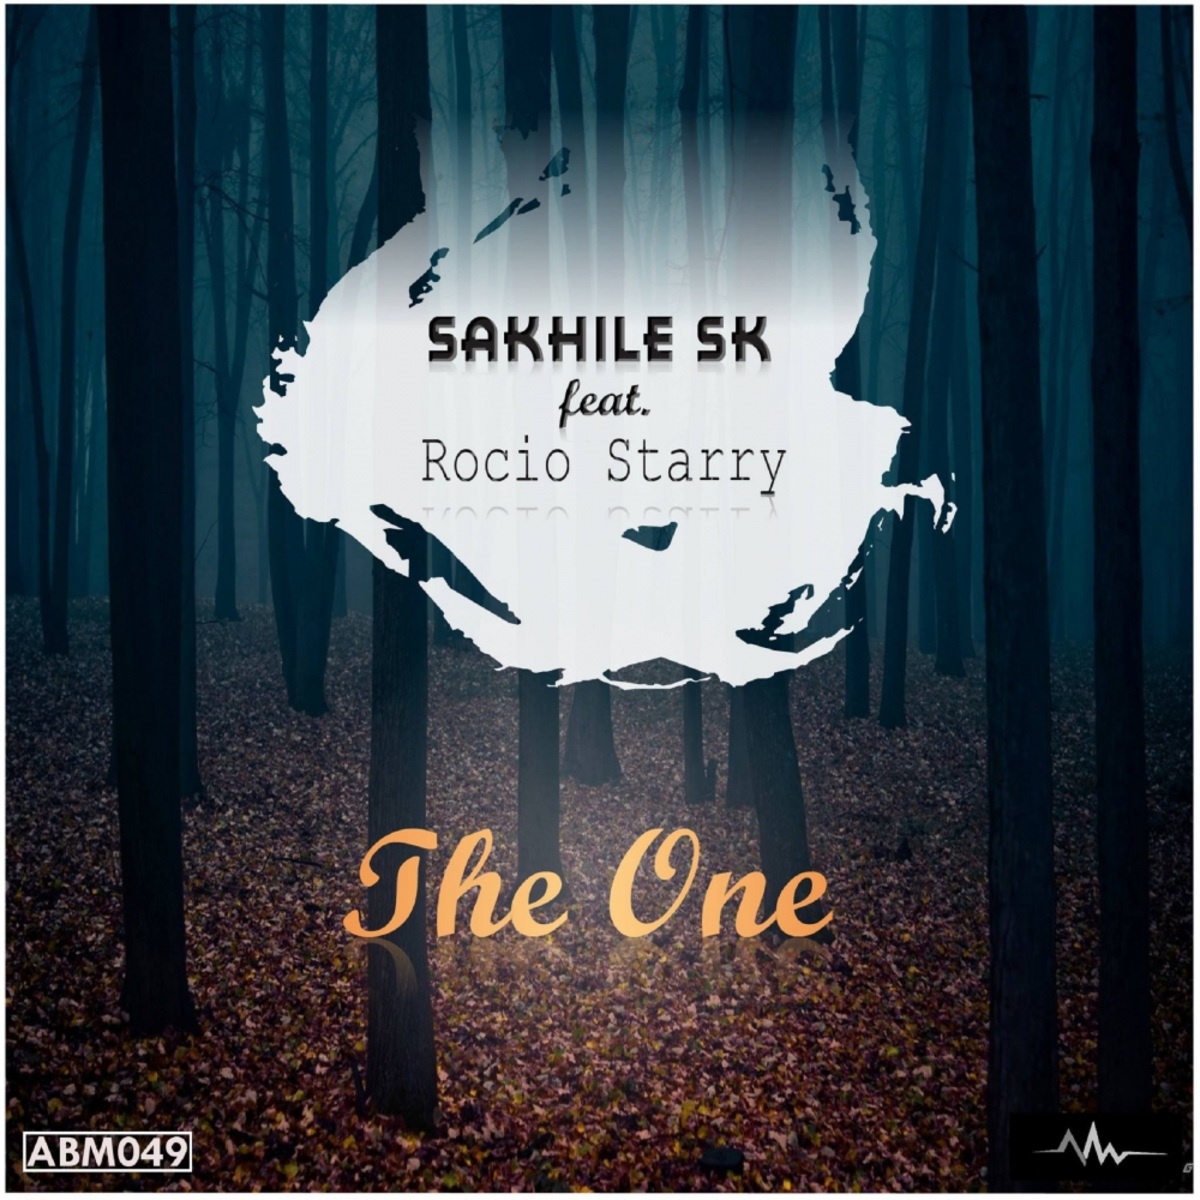 Sakhile SK & Rocio Starry - The one / Abyss Music